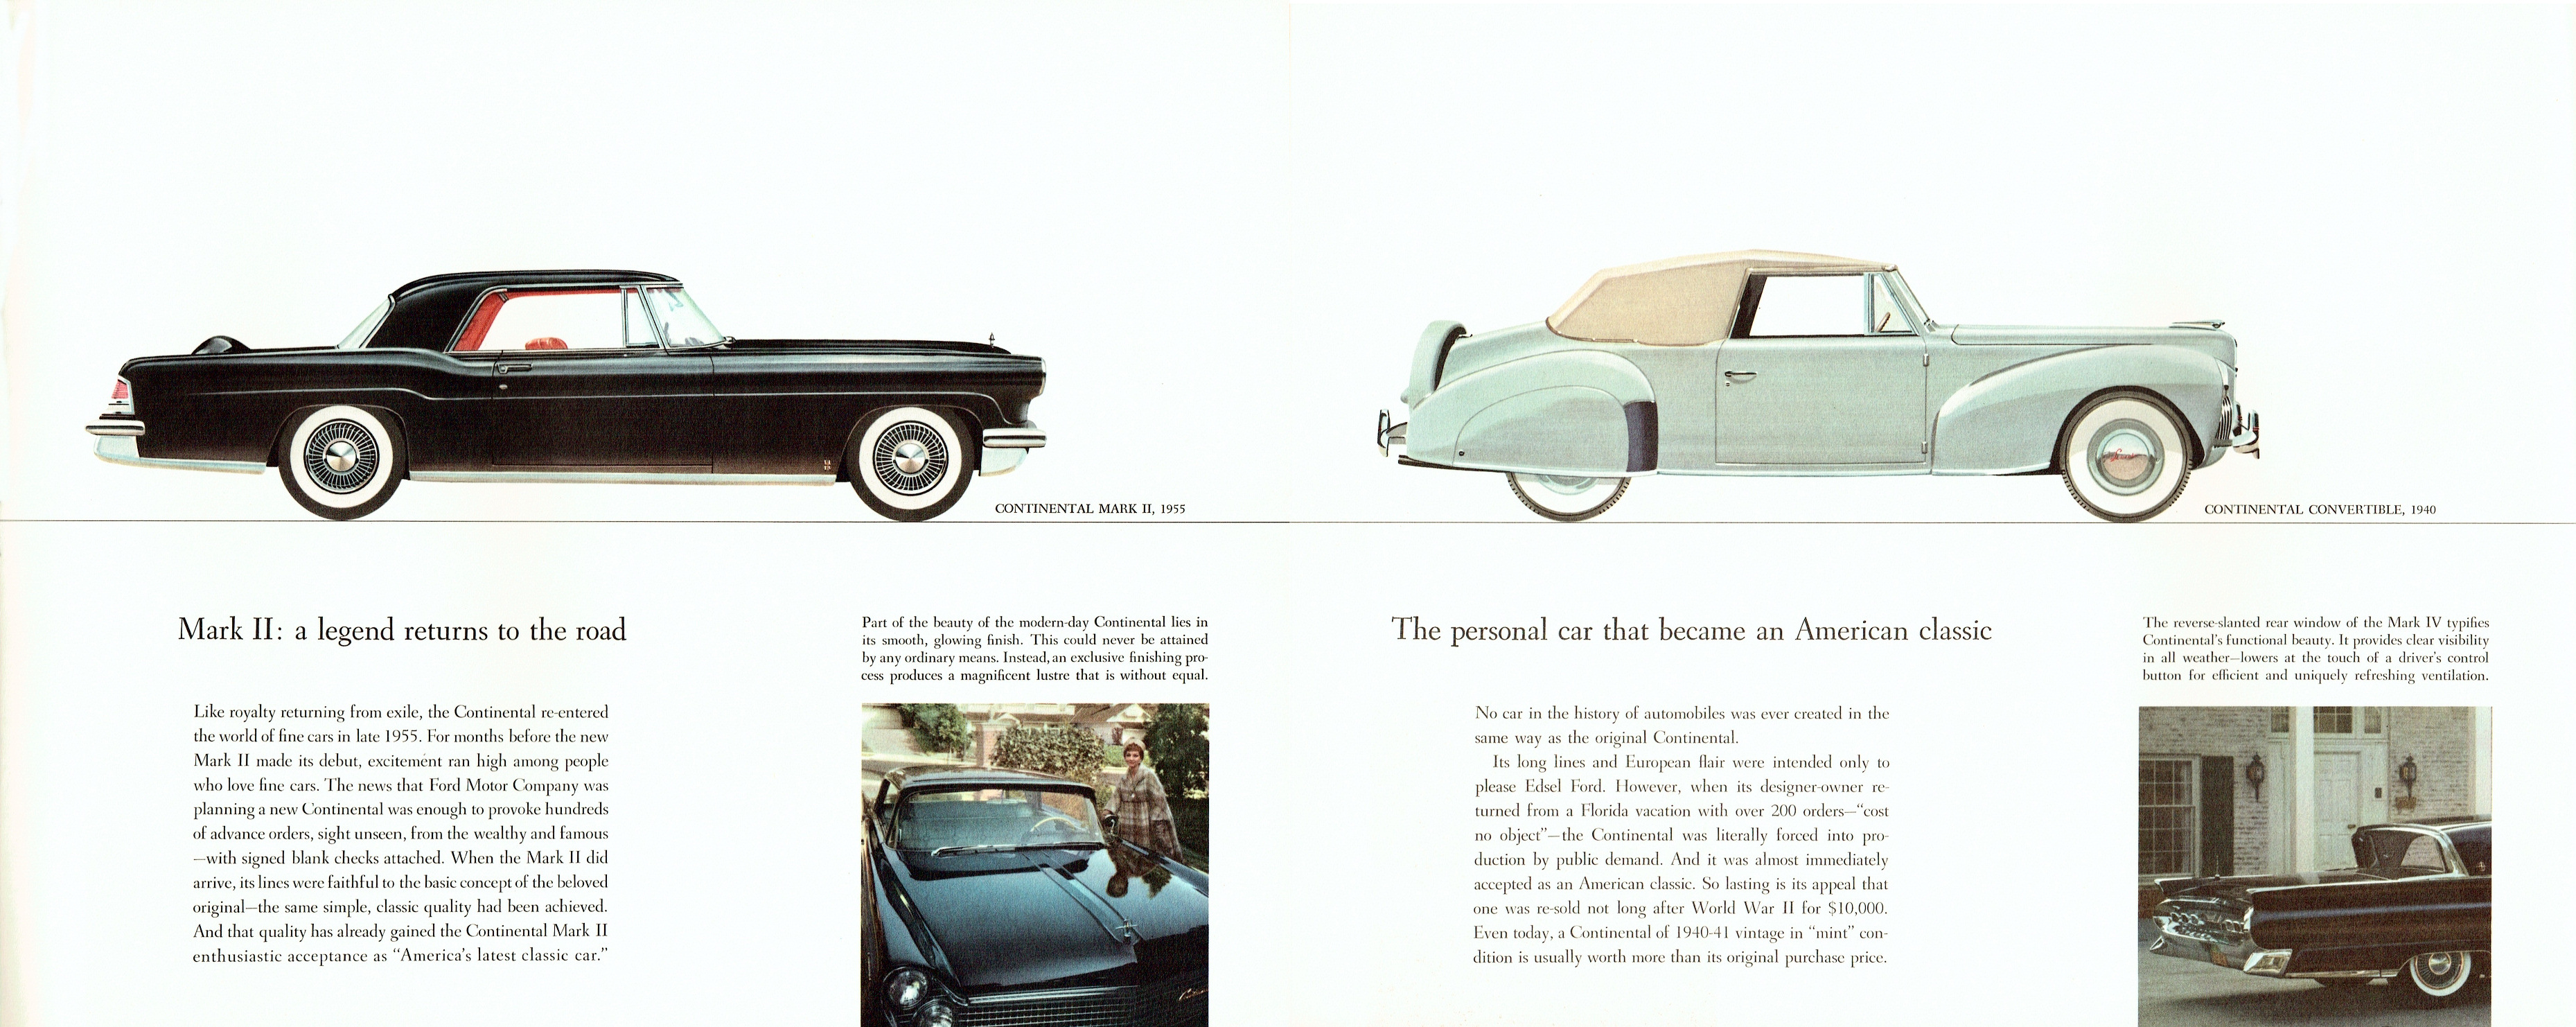 1959_Lincoln_Mailer-14-15